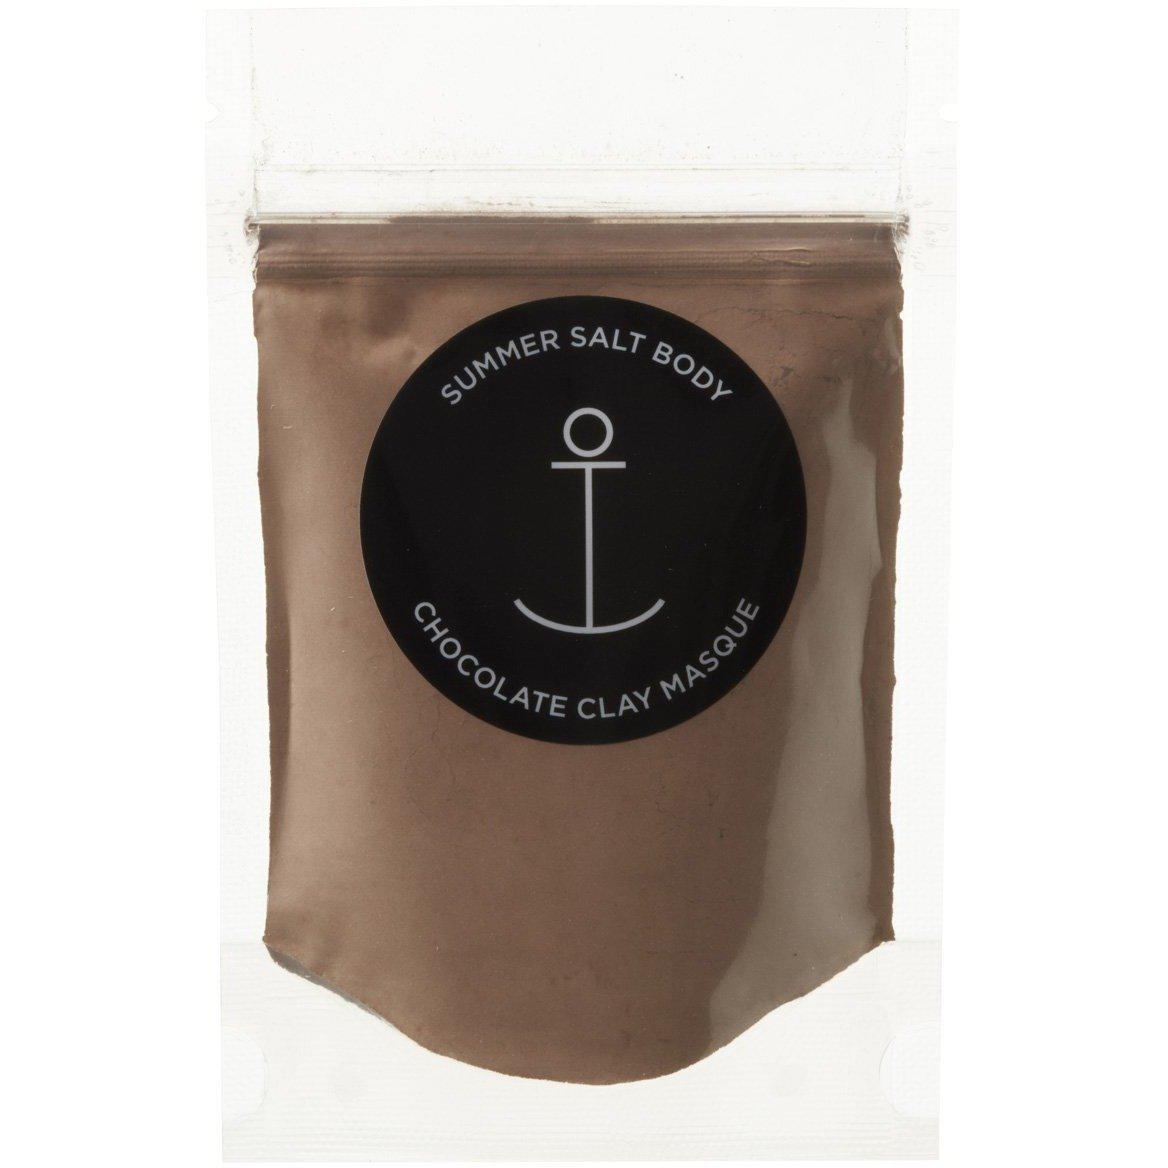 Mini Clay Mask - 40g-Beauty & Well-Being-Summer Salt Body-Chocolate Clay-The Bay Room